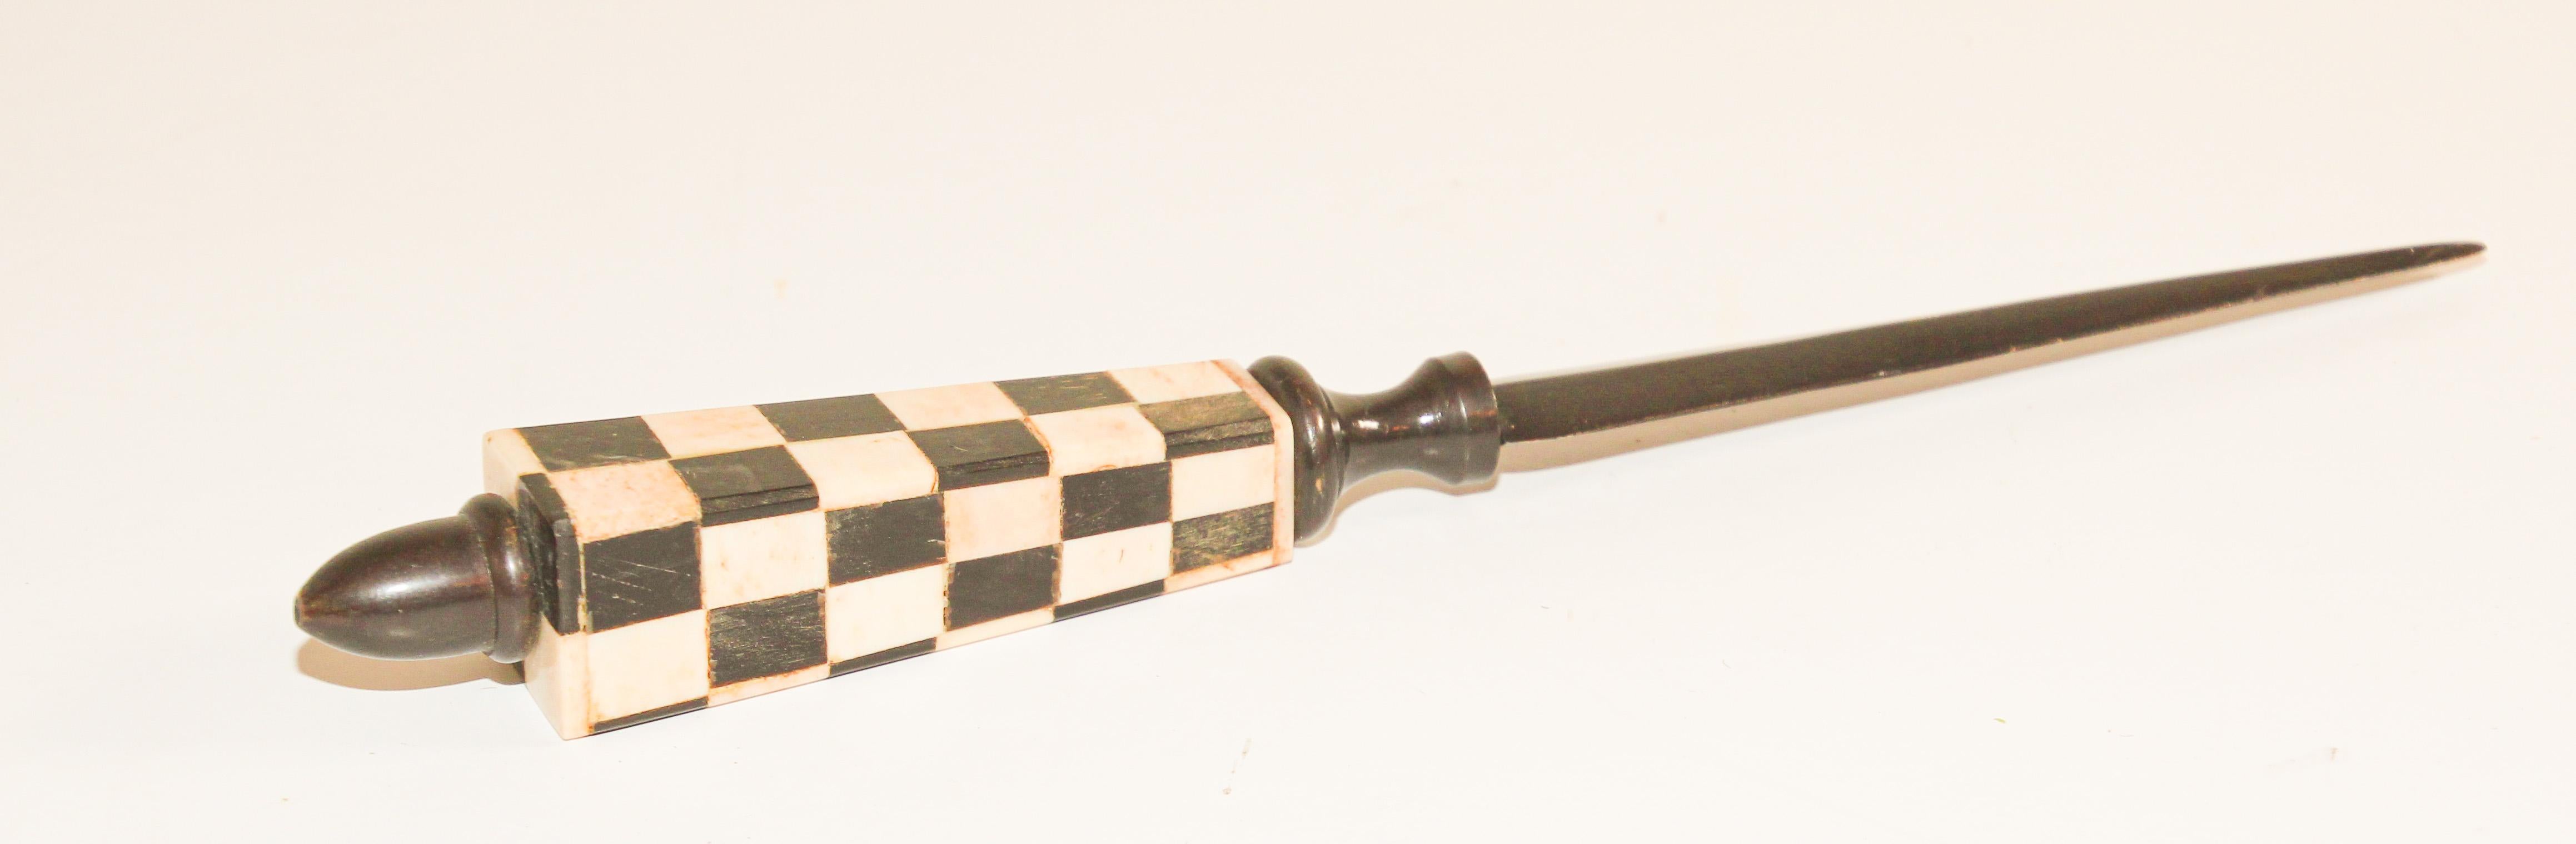 20th Century Handcrafted Artisan Made Letter Opener with Bone Handle